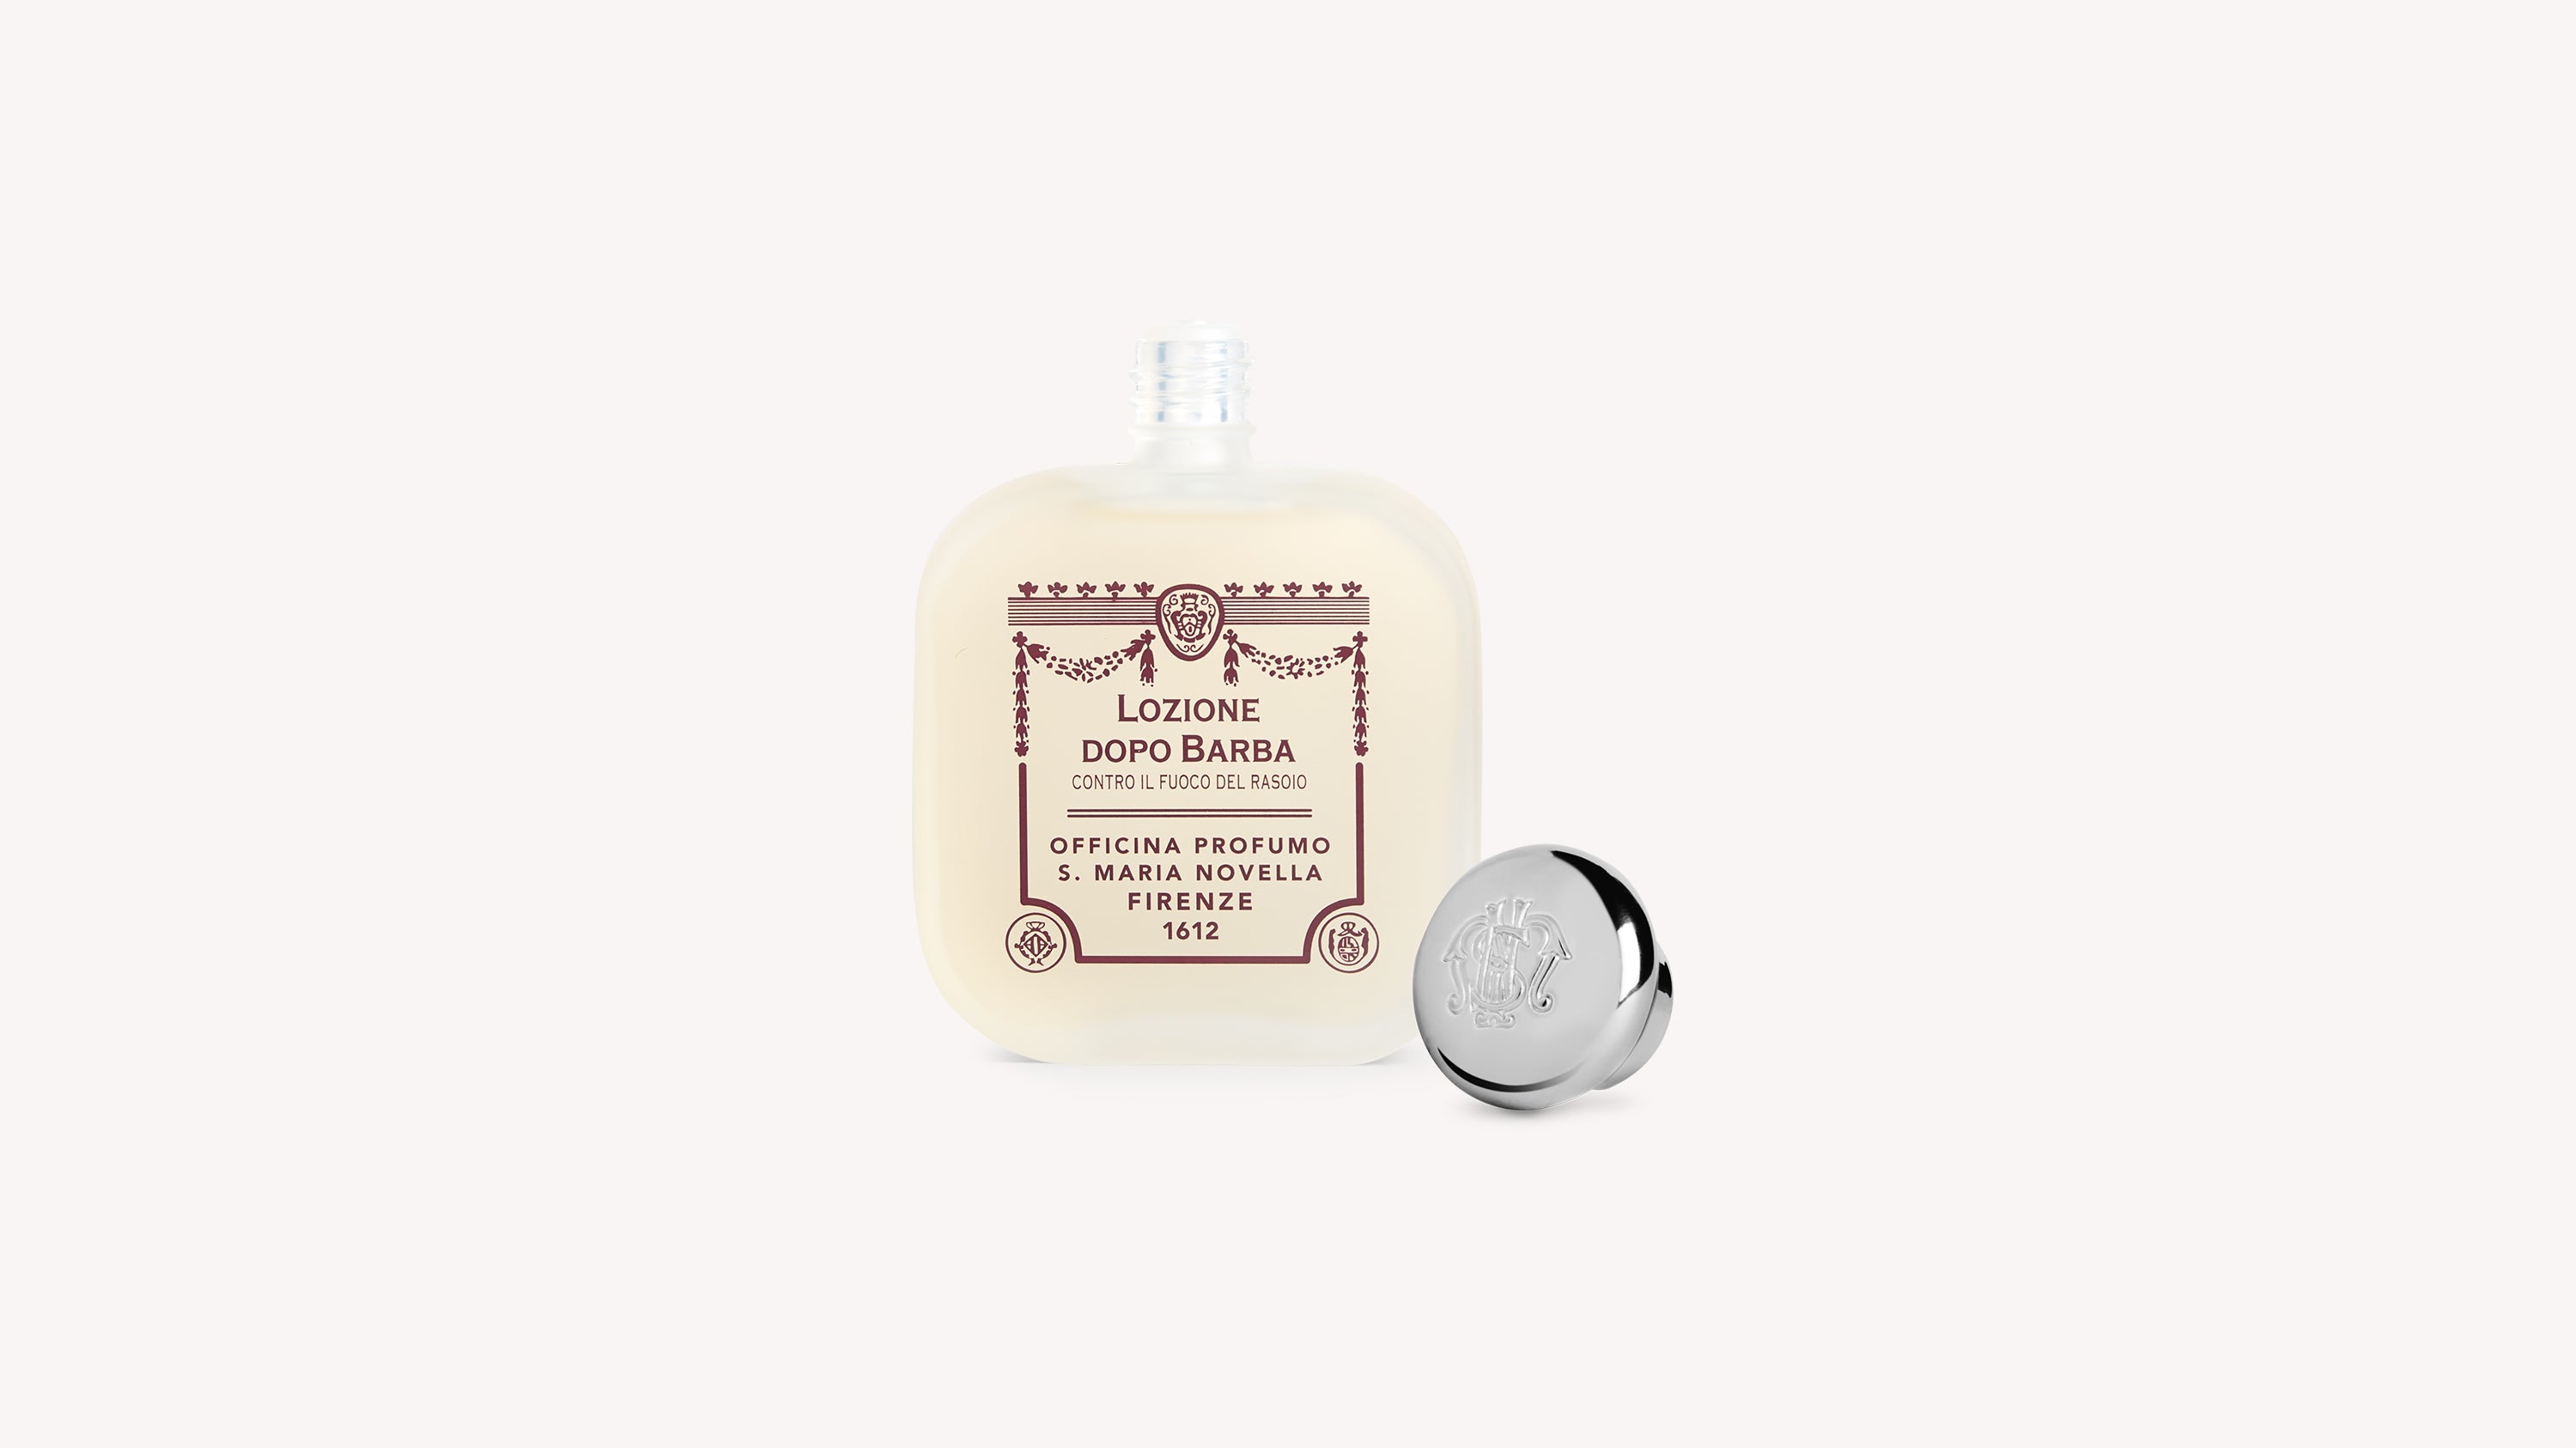 Colonia Russa After Shave Lotion